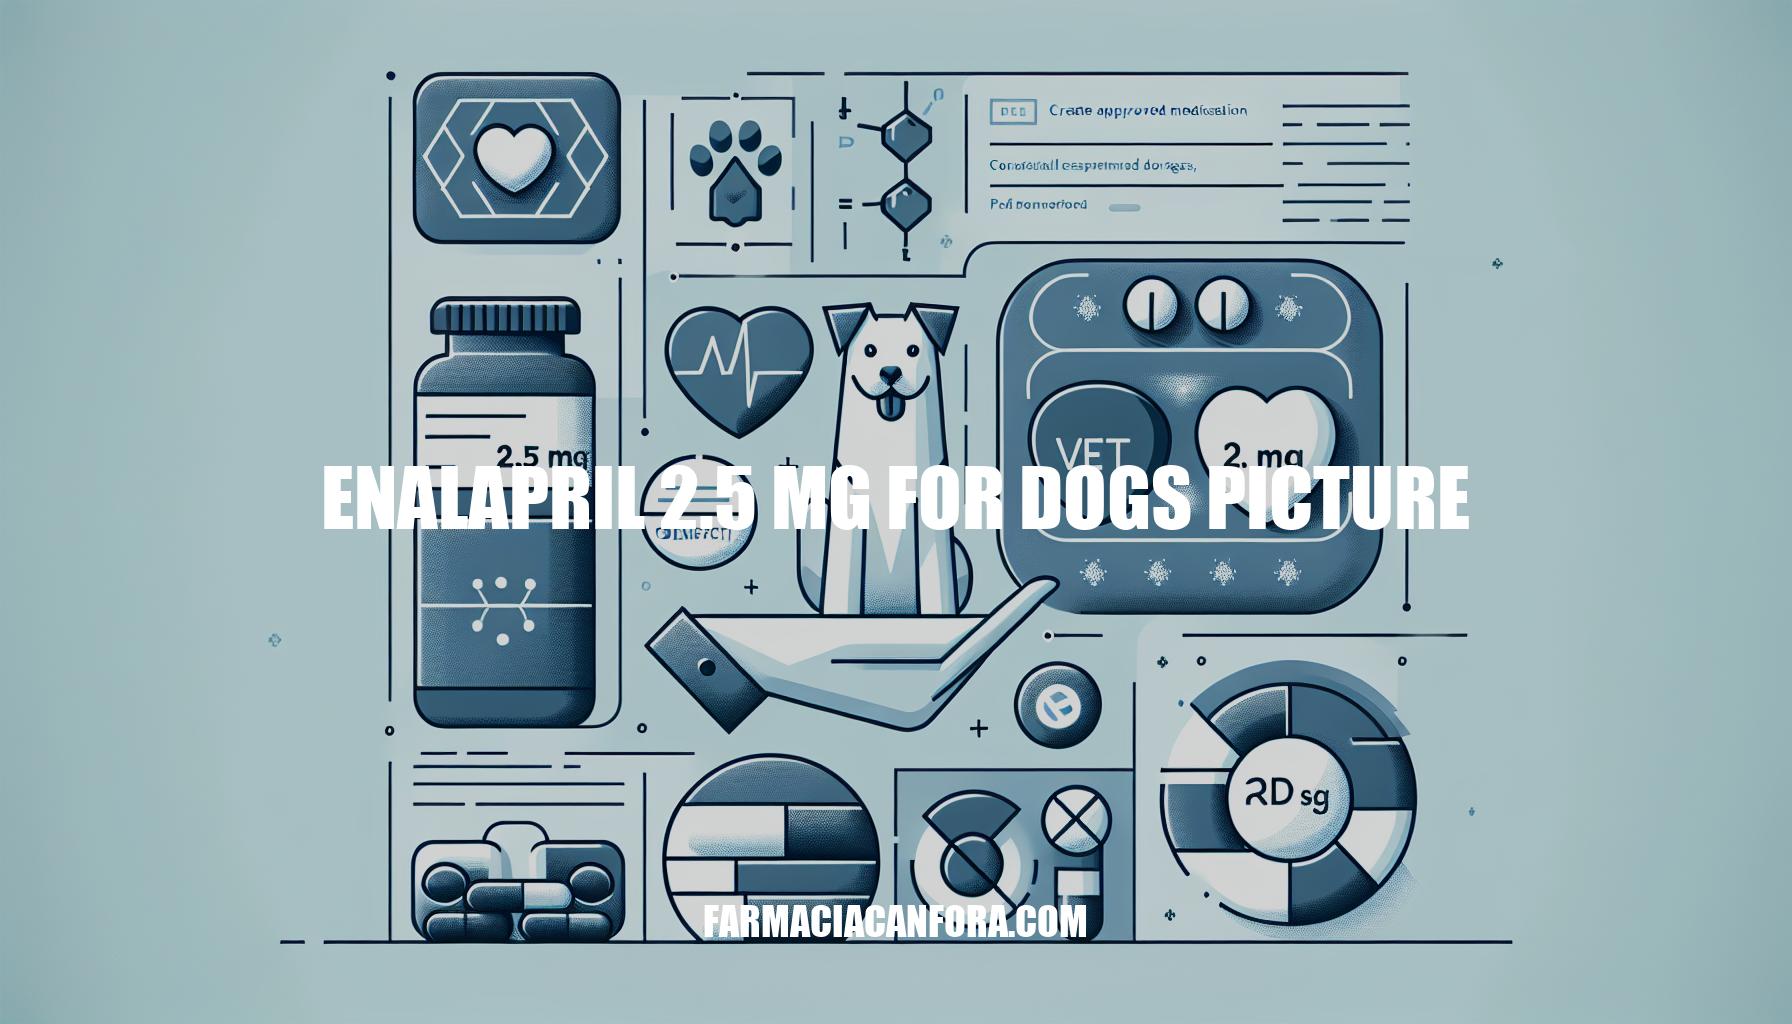 Enalapril 2.5 mg for Dogs Picture: Dosage, Benefits & Side Effects